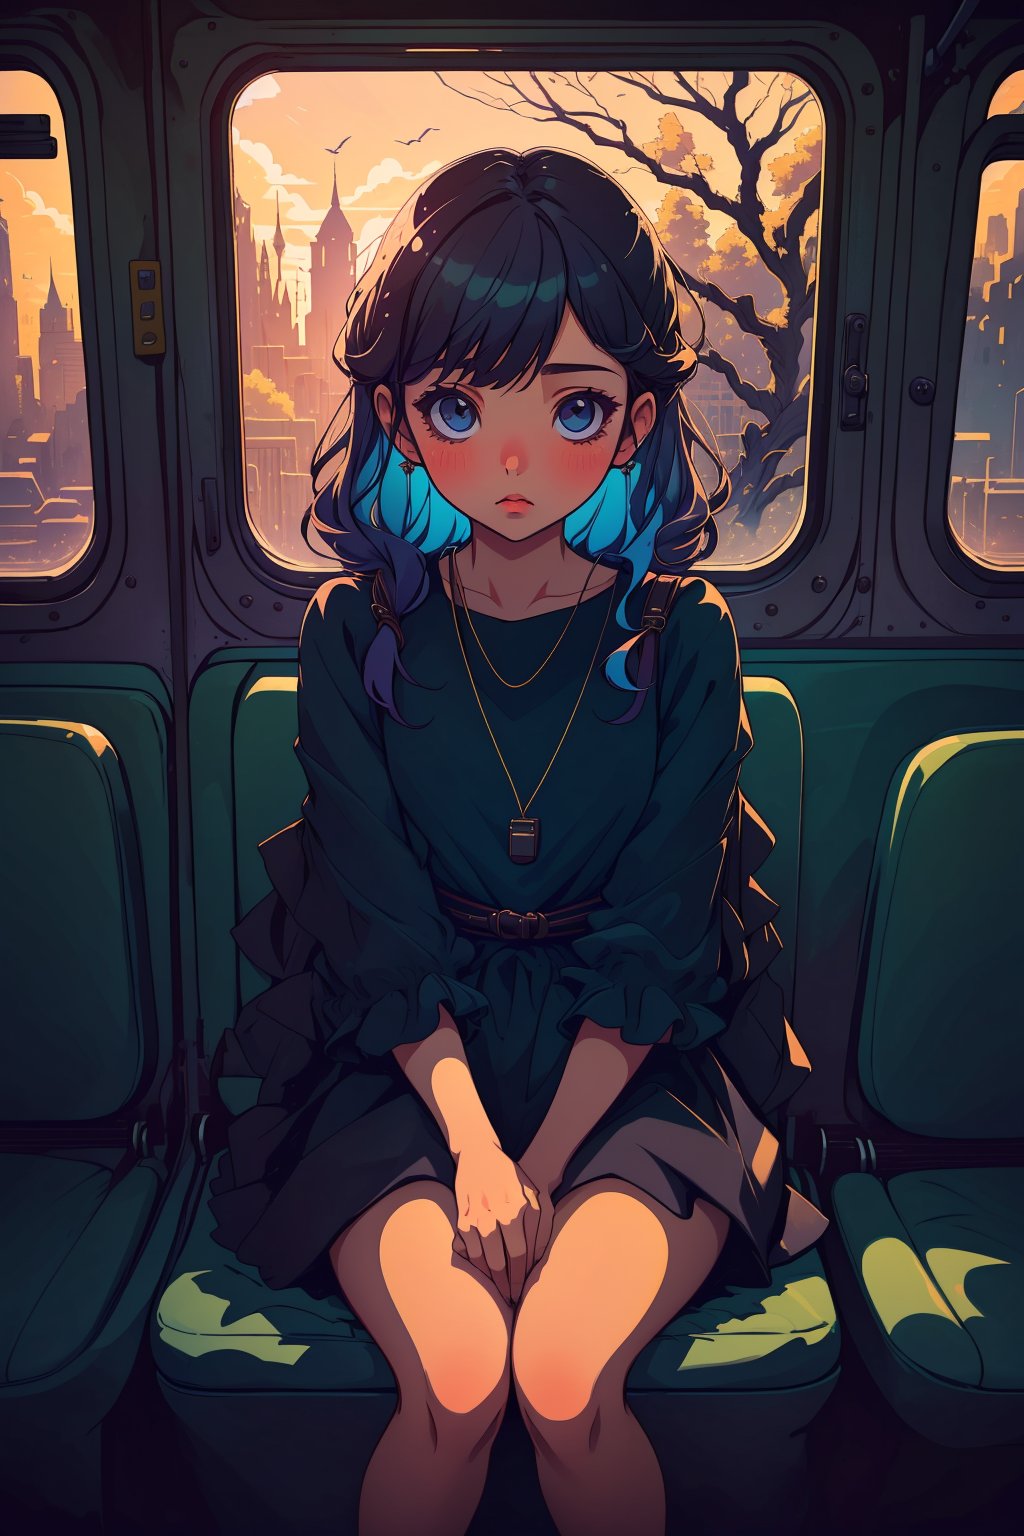 cute girl sitting on a bus,solo, dress, natural lighting from window, 35mm lens, soft and subtle lighting, girl centered in frame, shoot from eye level, incorporate cool and calming colors,tshee00d,vector style